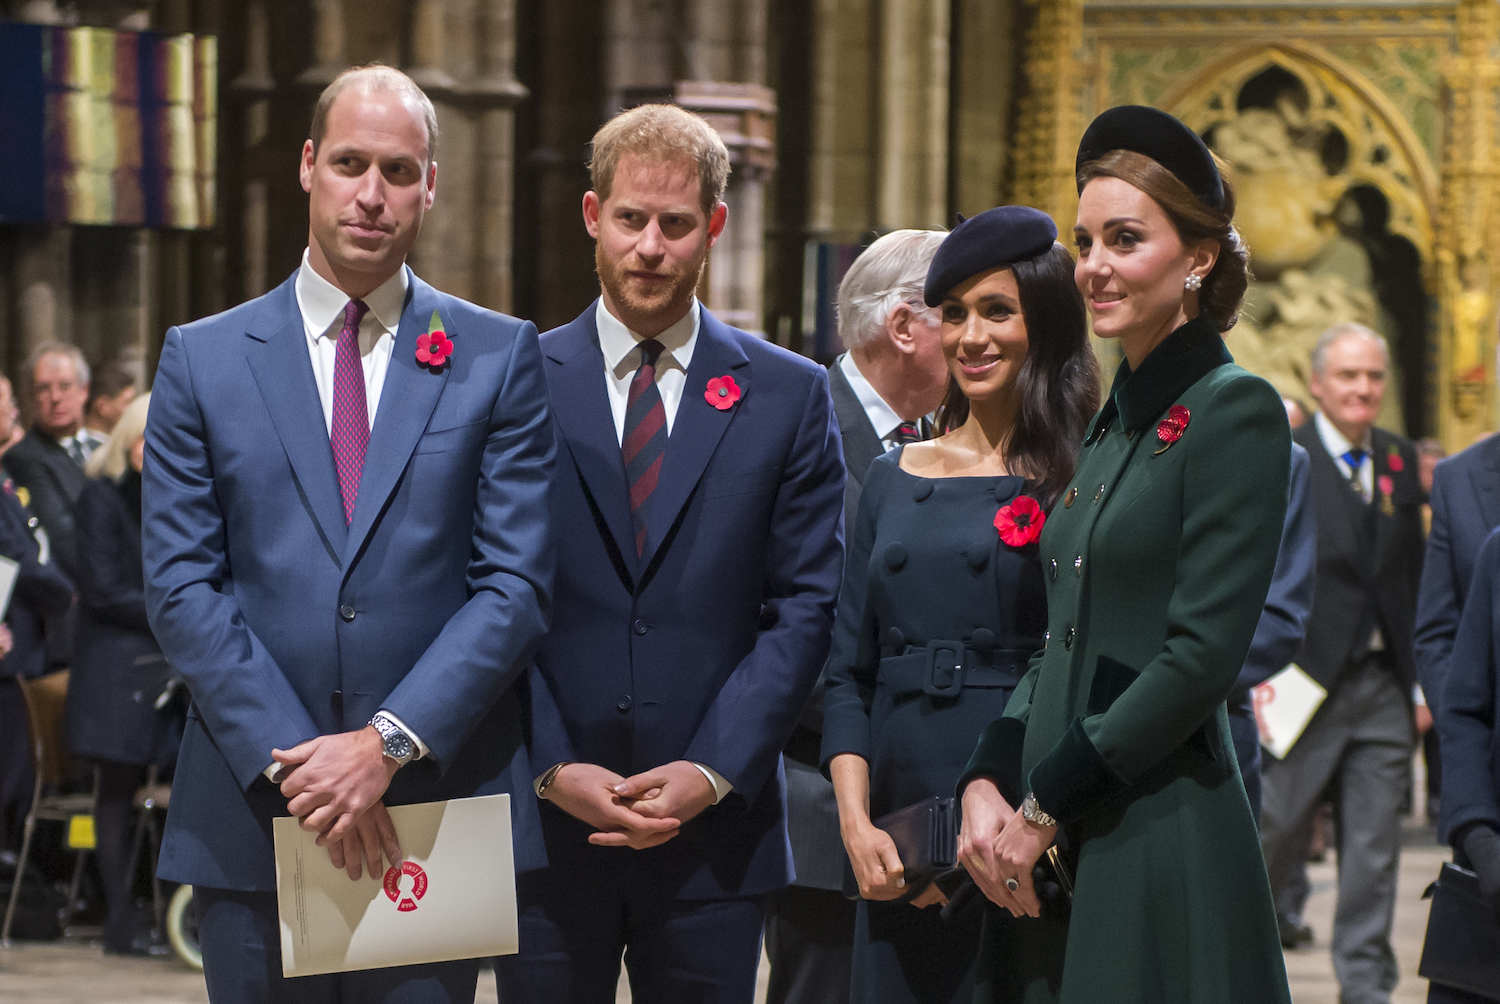 Prince William, Prince Harry, Meghan, Duchess of Sussex, and Catherine, Duchess of Cambridge arrive at Westminster Abbey to attend a service to mark the centenary of the Armistice in central London on November 11, 2018